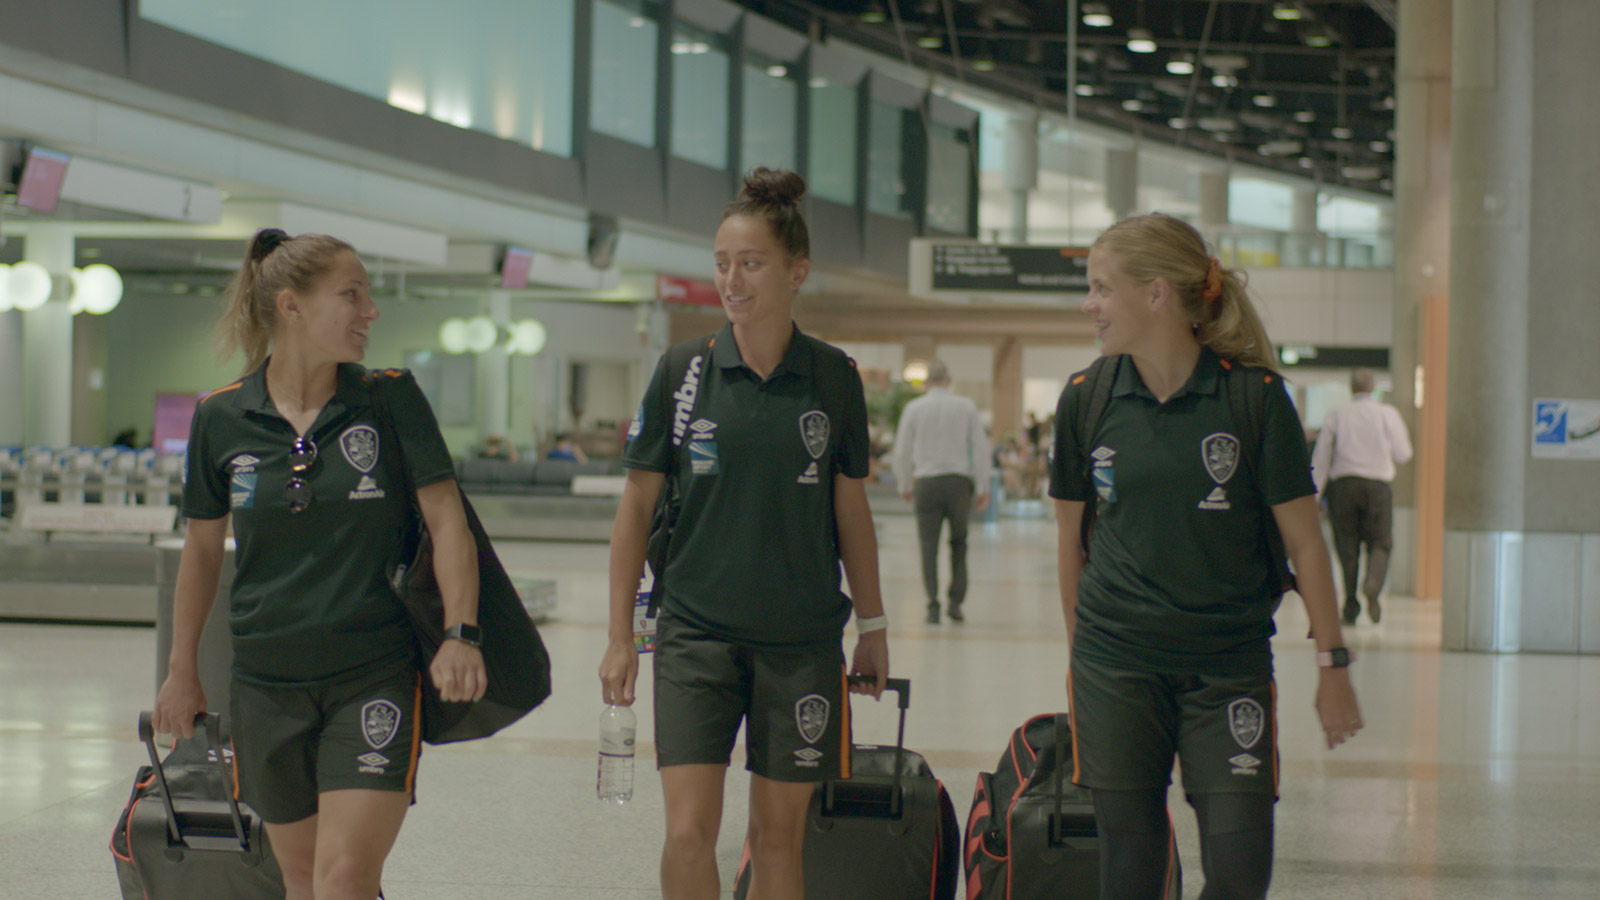 The Brisbane Roar W-League team travel interstate for away games frequently